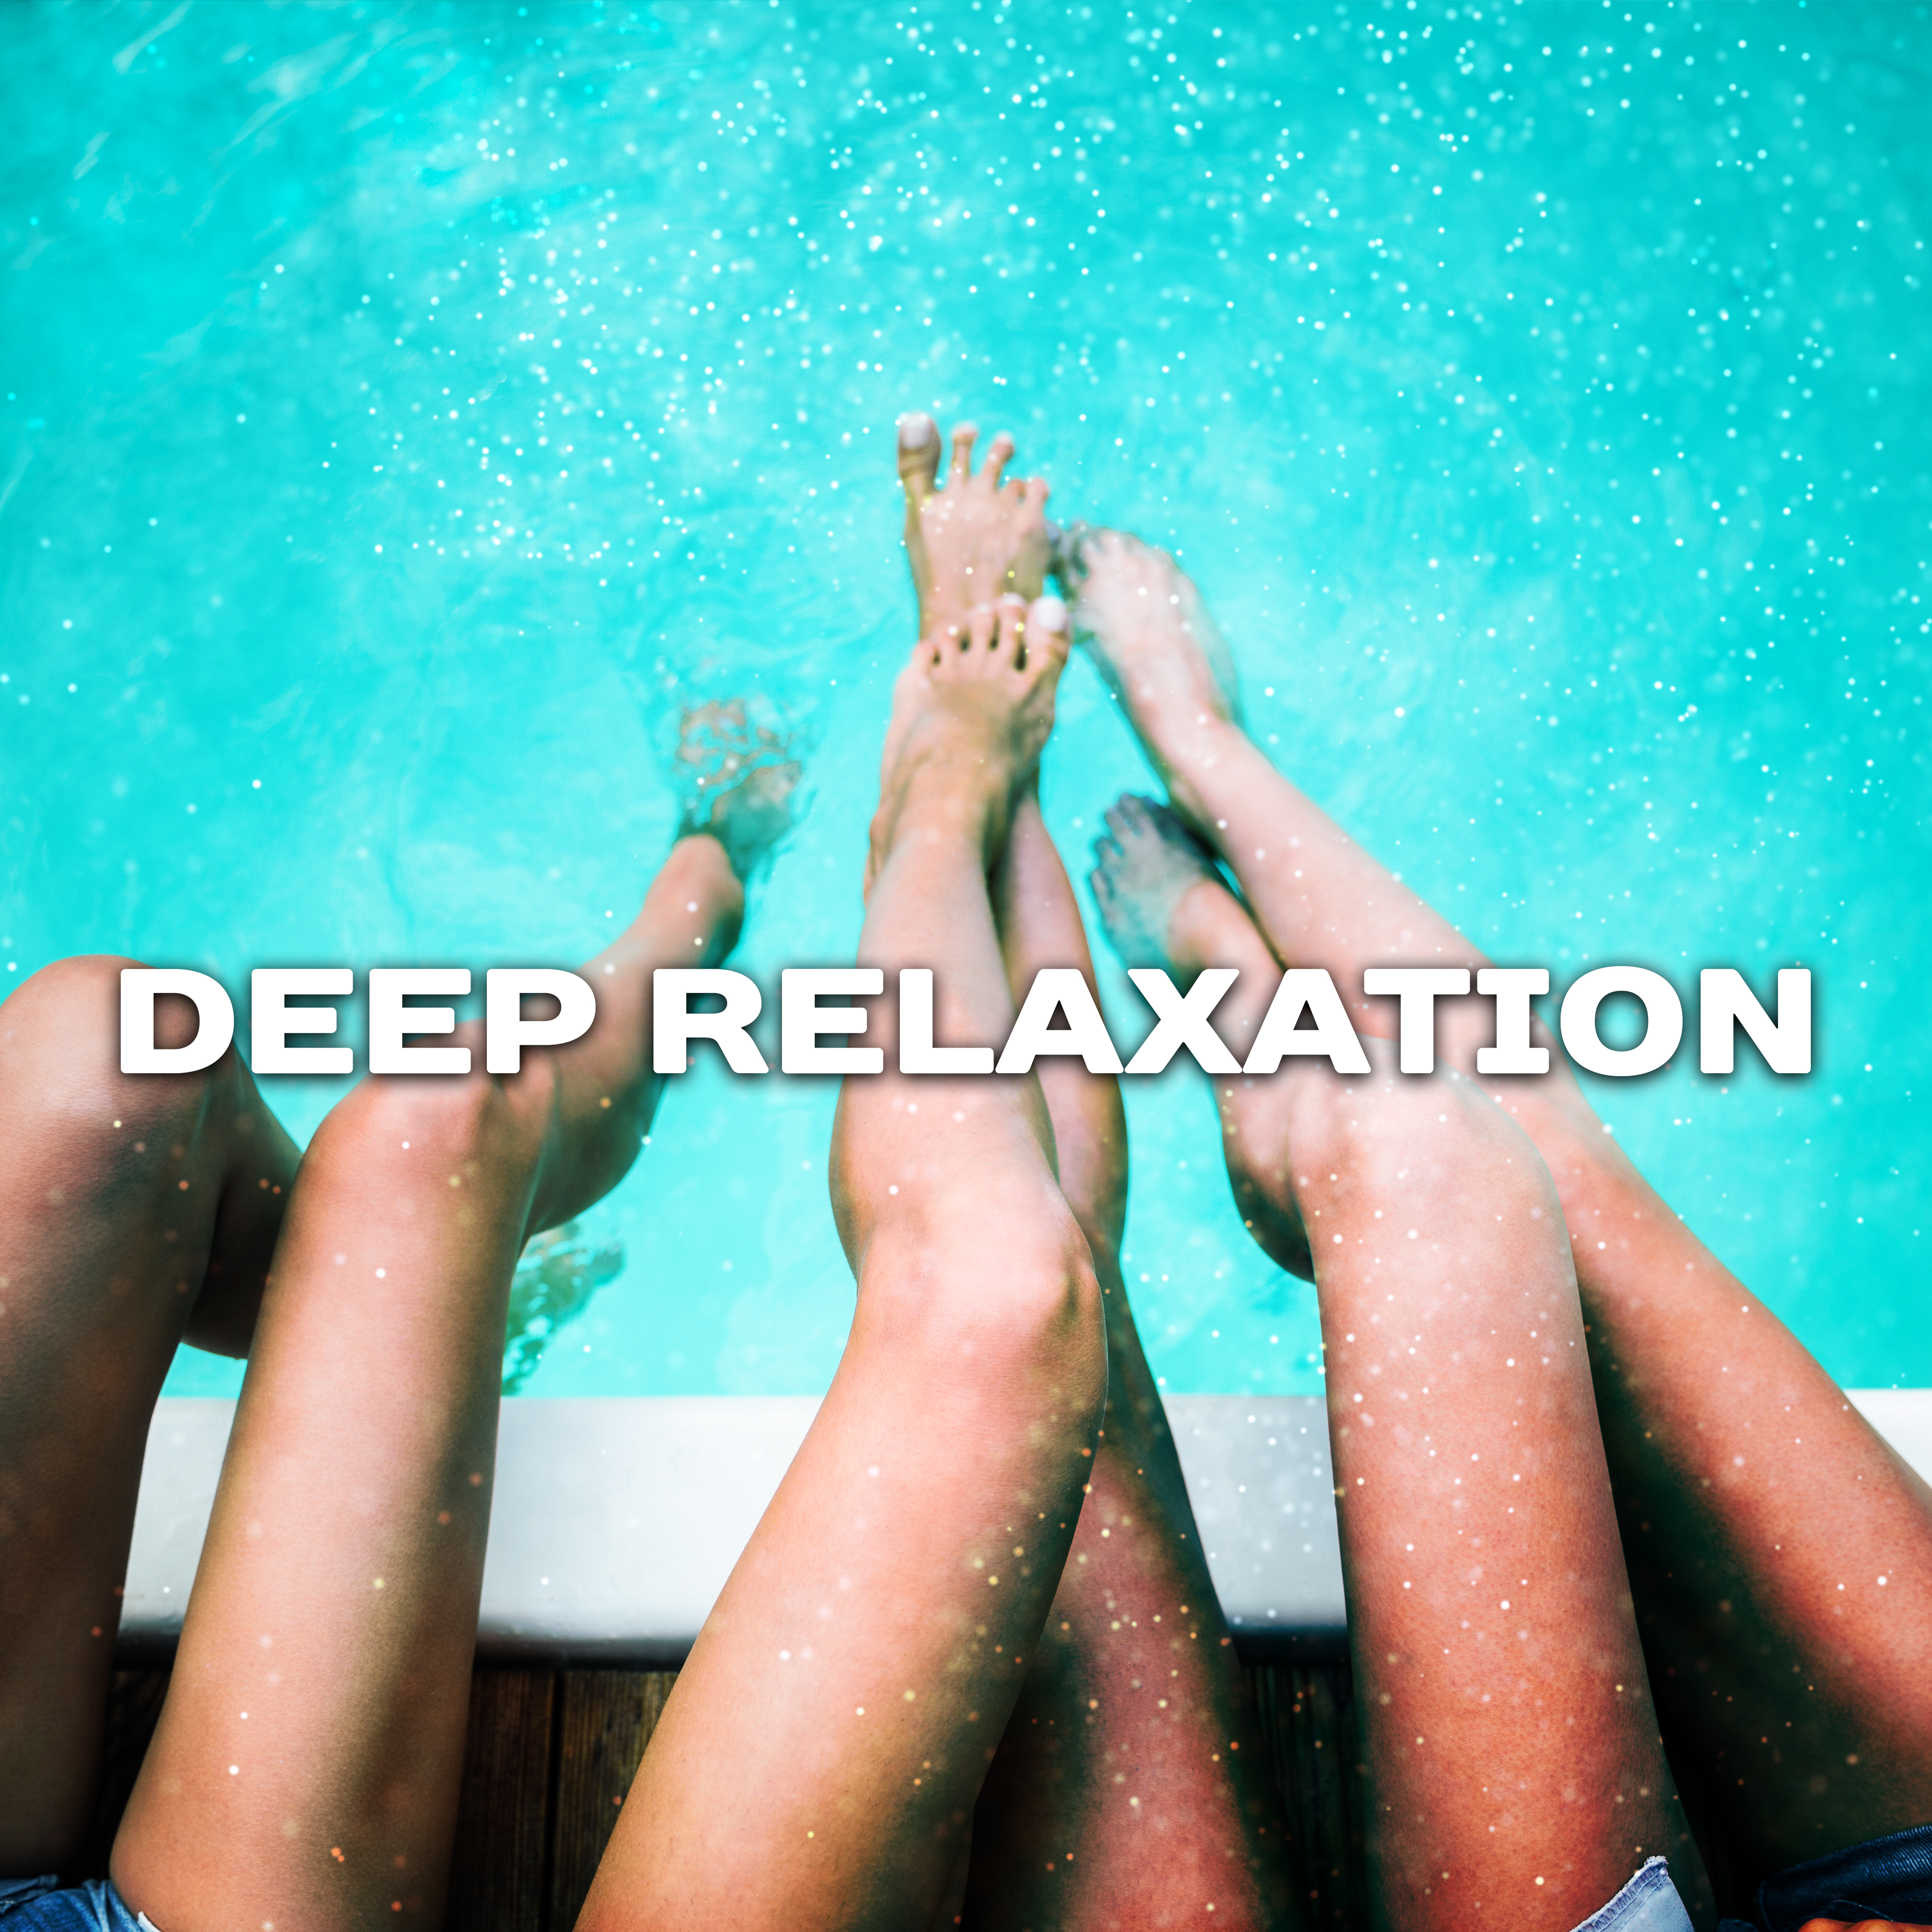 Deep Relaxation  Nature Sounds, Rest, Bliss, New Age, Music 2017, Therapy Music